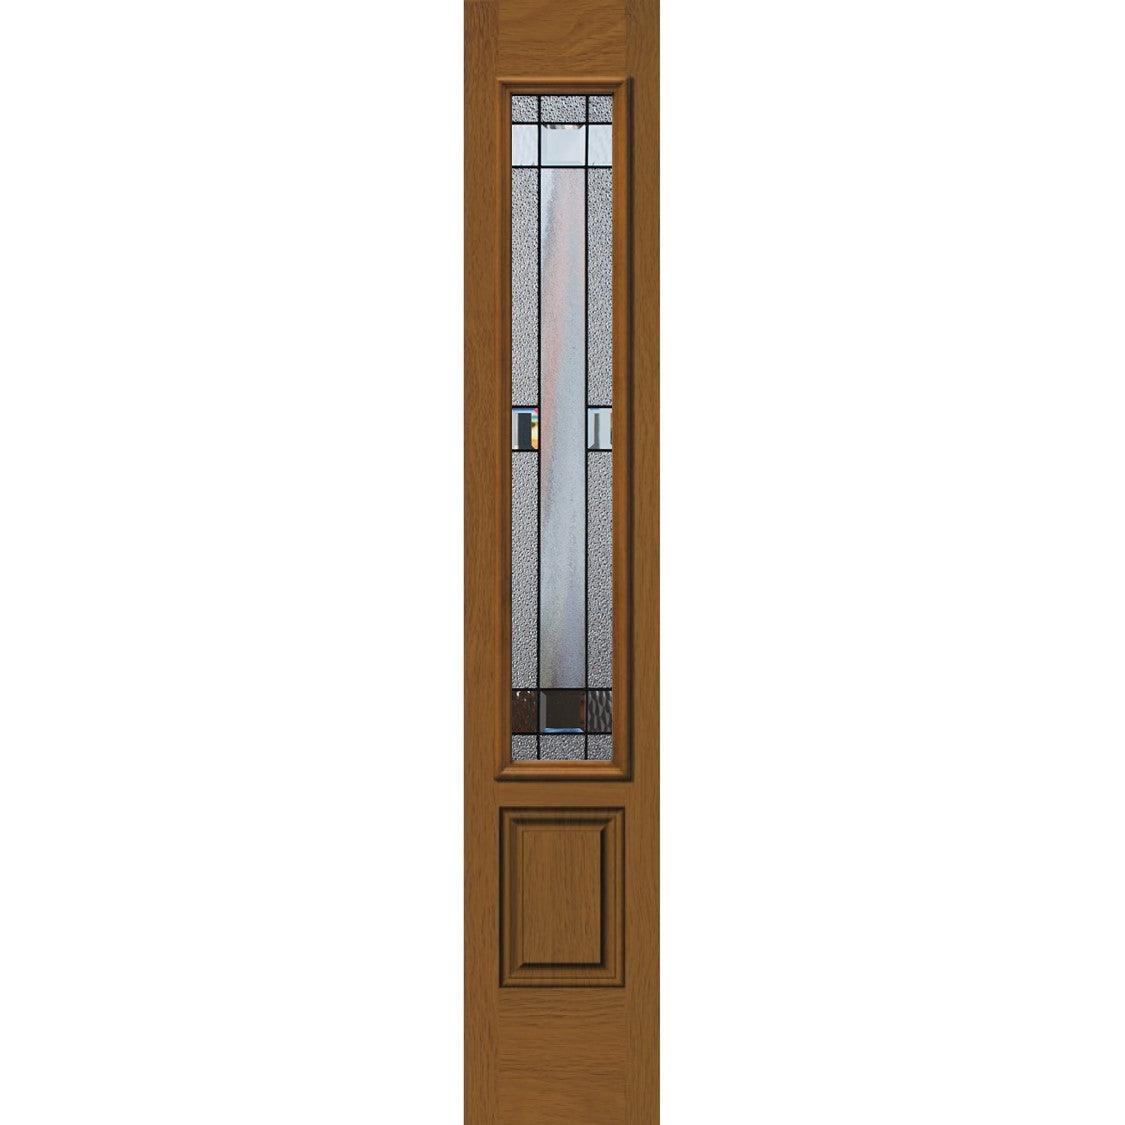 Portland Glass and Frame Kit (3/4 Sidelite 10" x 50" Frame Size) - Pease Doors: The Door Store